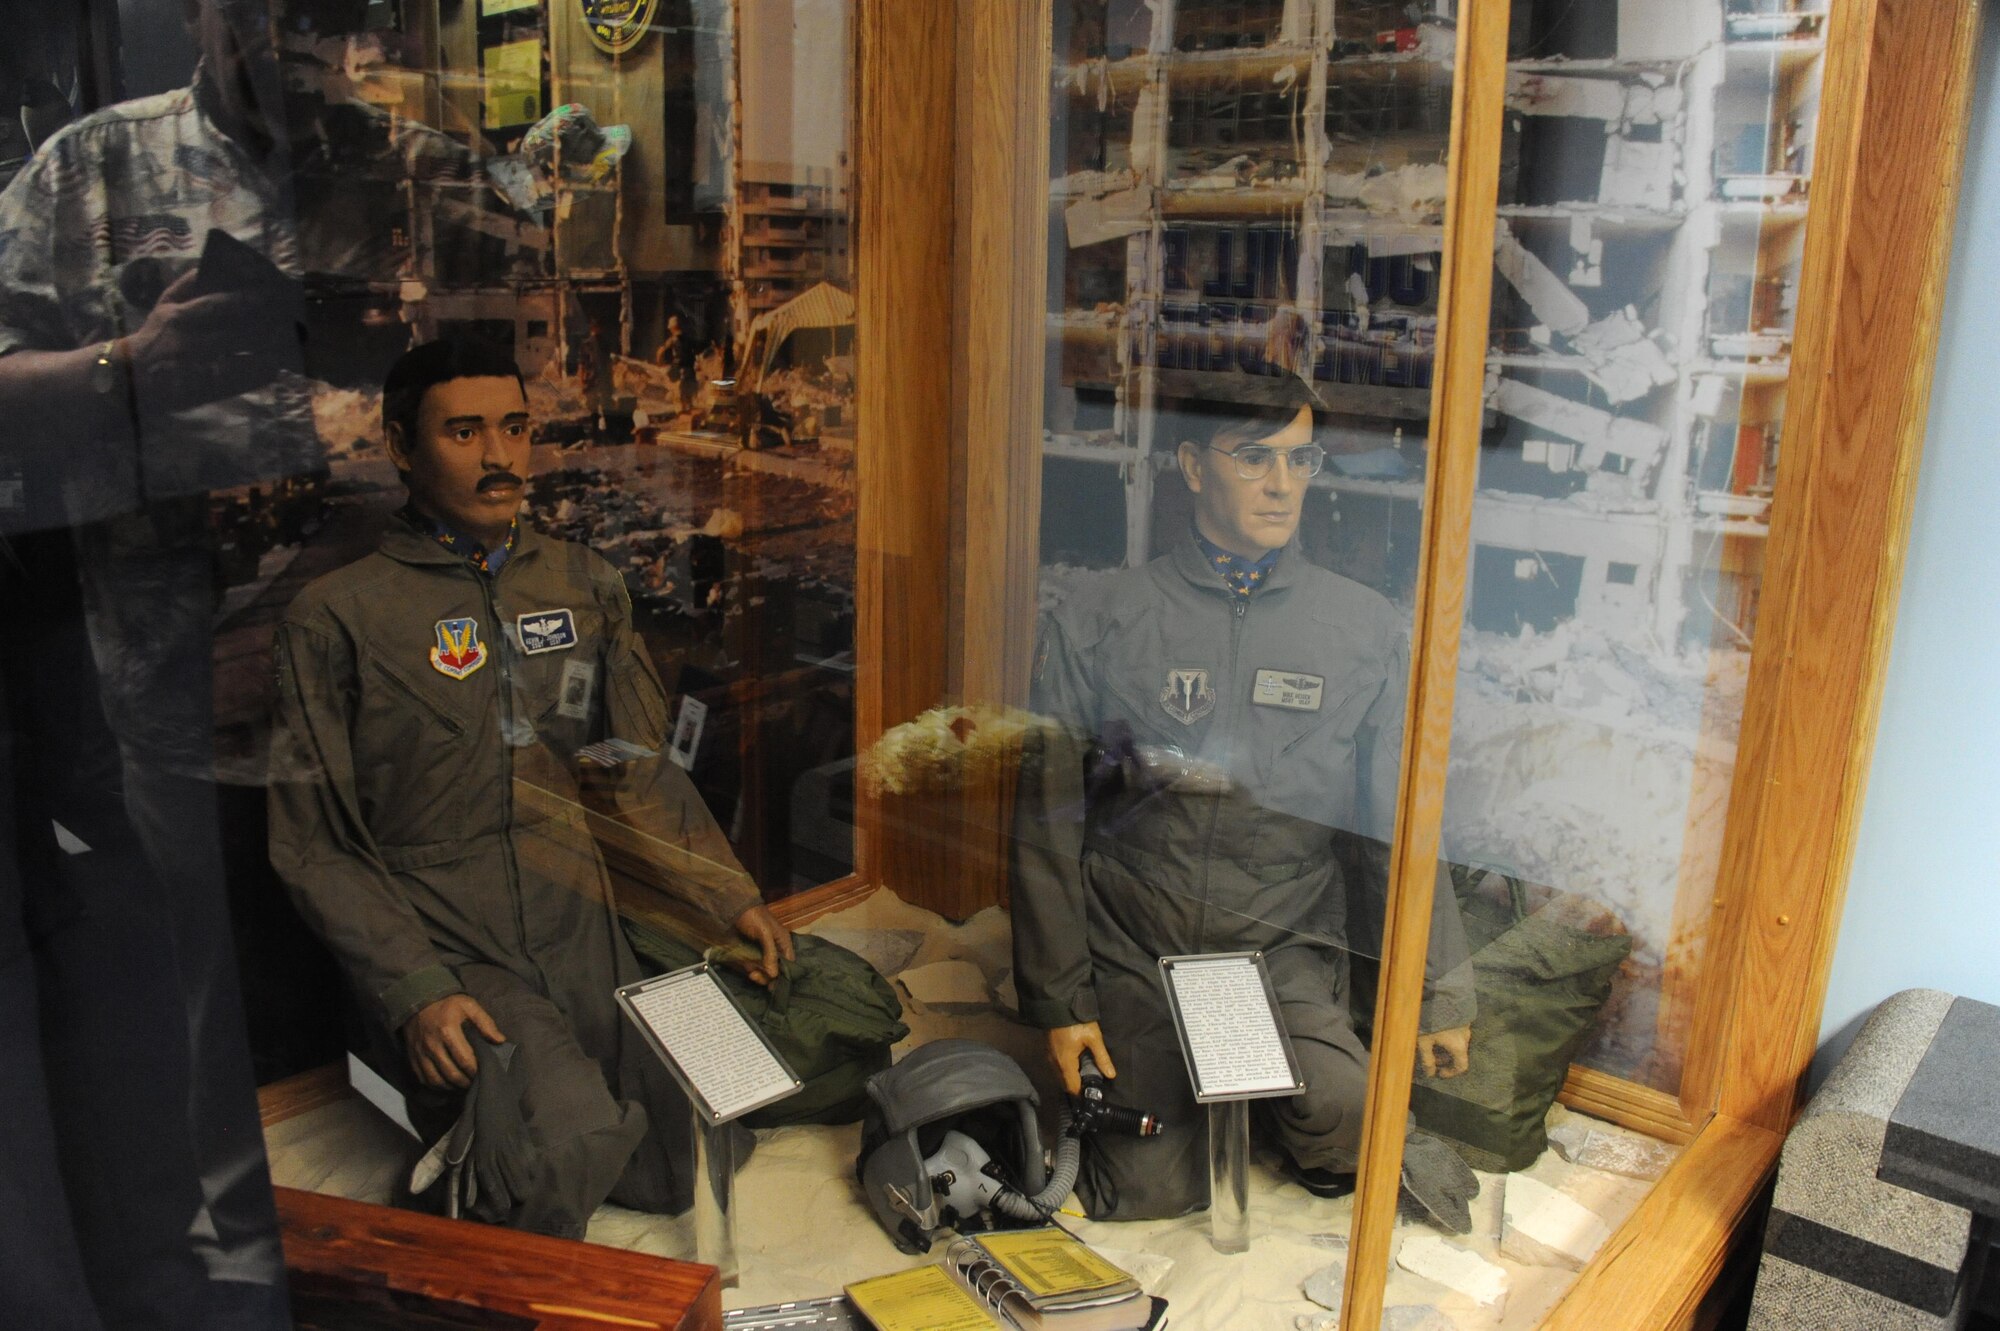 The Khobar Towers attack memorial sits on display during the 20th anniversary of the terrorist bombing and exhibit unveiling, June 23, 2016, Maxwell Air Force Base, Ala. The exhibit features the uniforms of three of 19 Airmen who perished that day, along with a plaque with all of their names and artifacts from the rubble of the living complex. (U.S. Air Force photo/Senior Airman Alexa Culbert) 